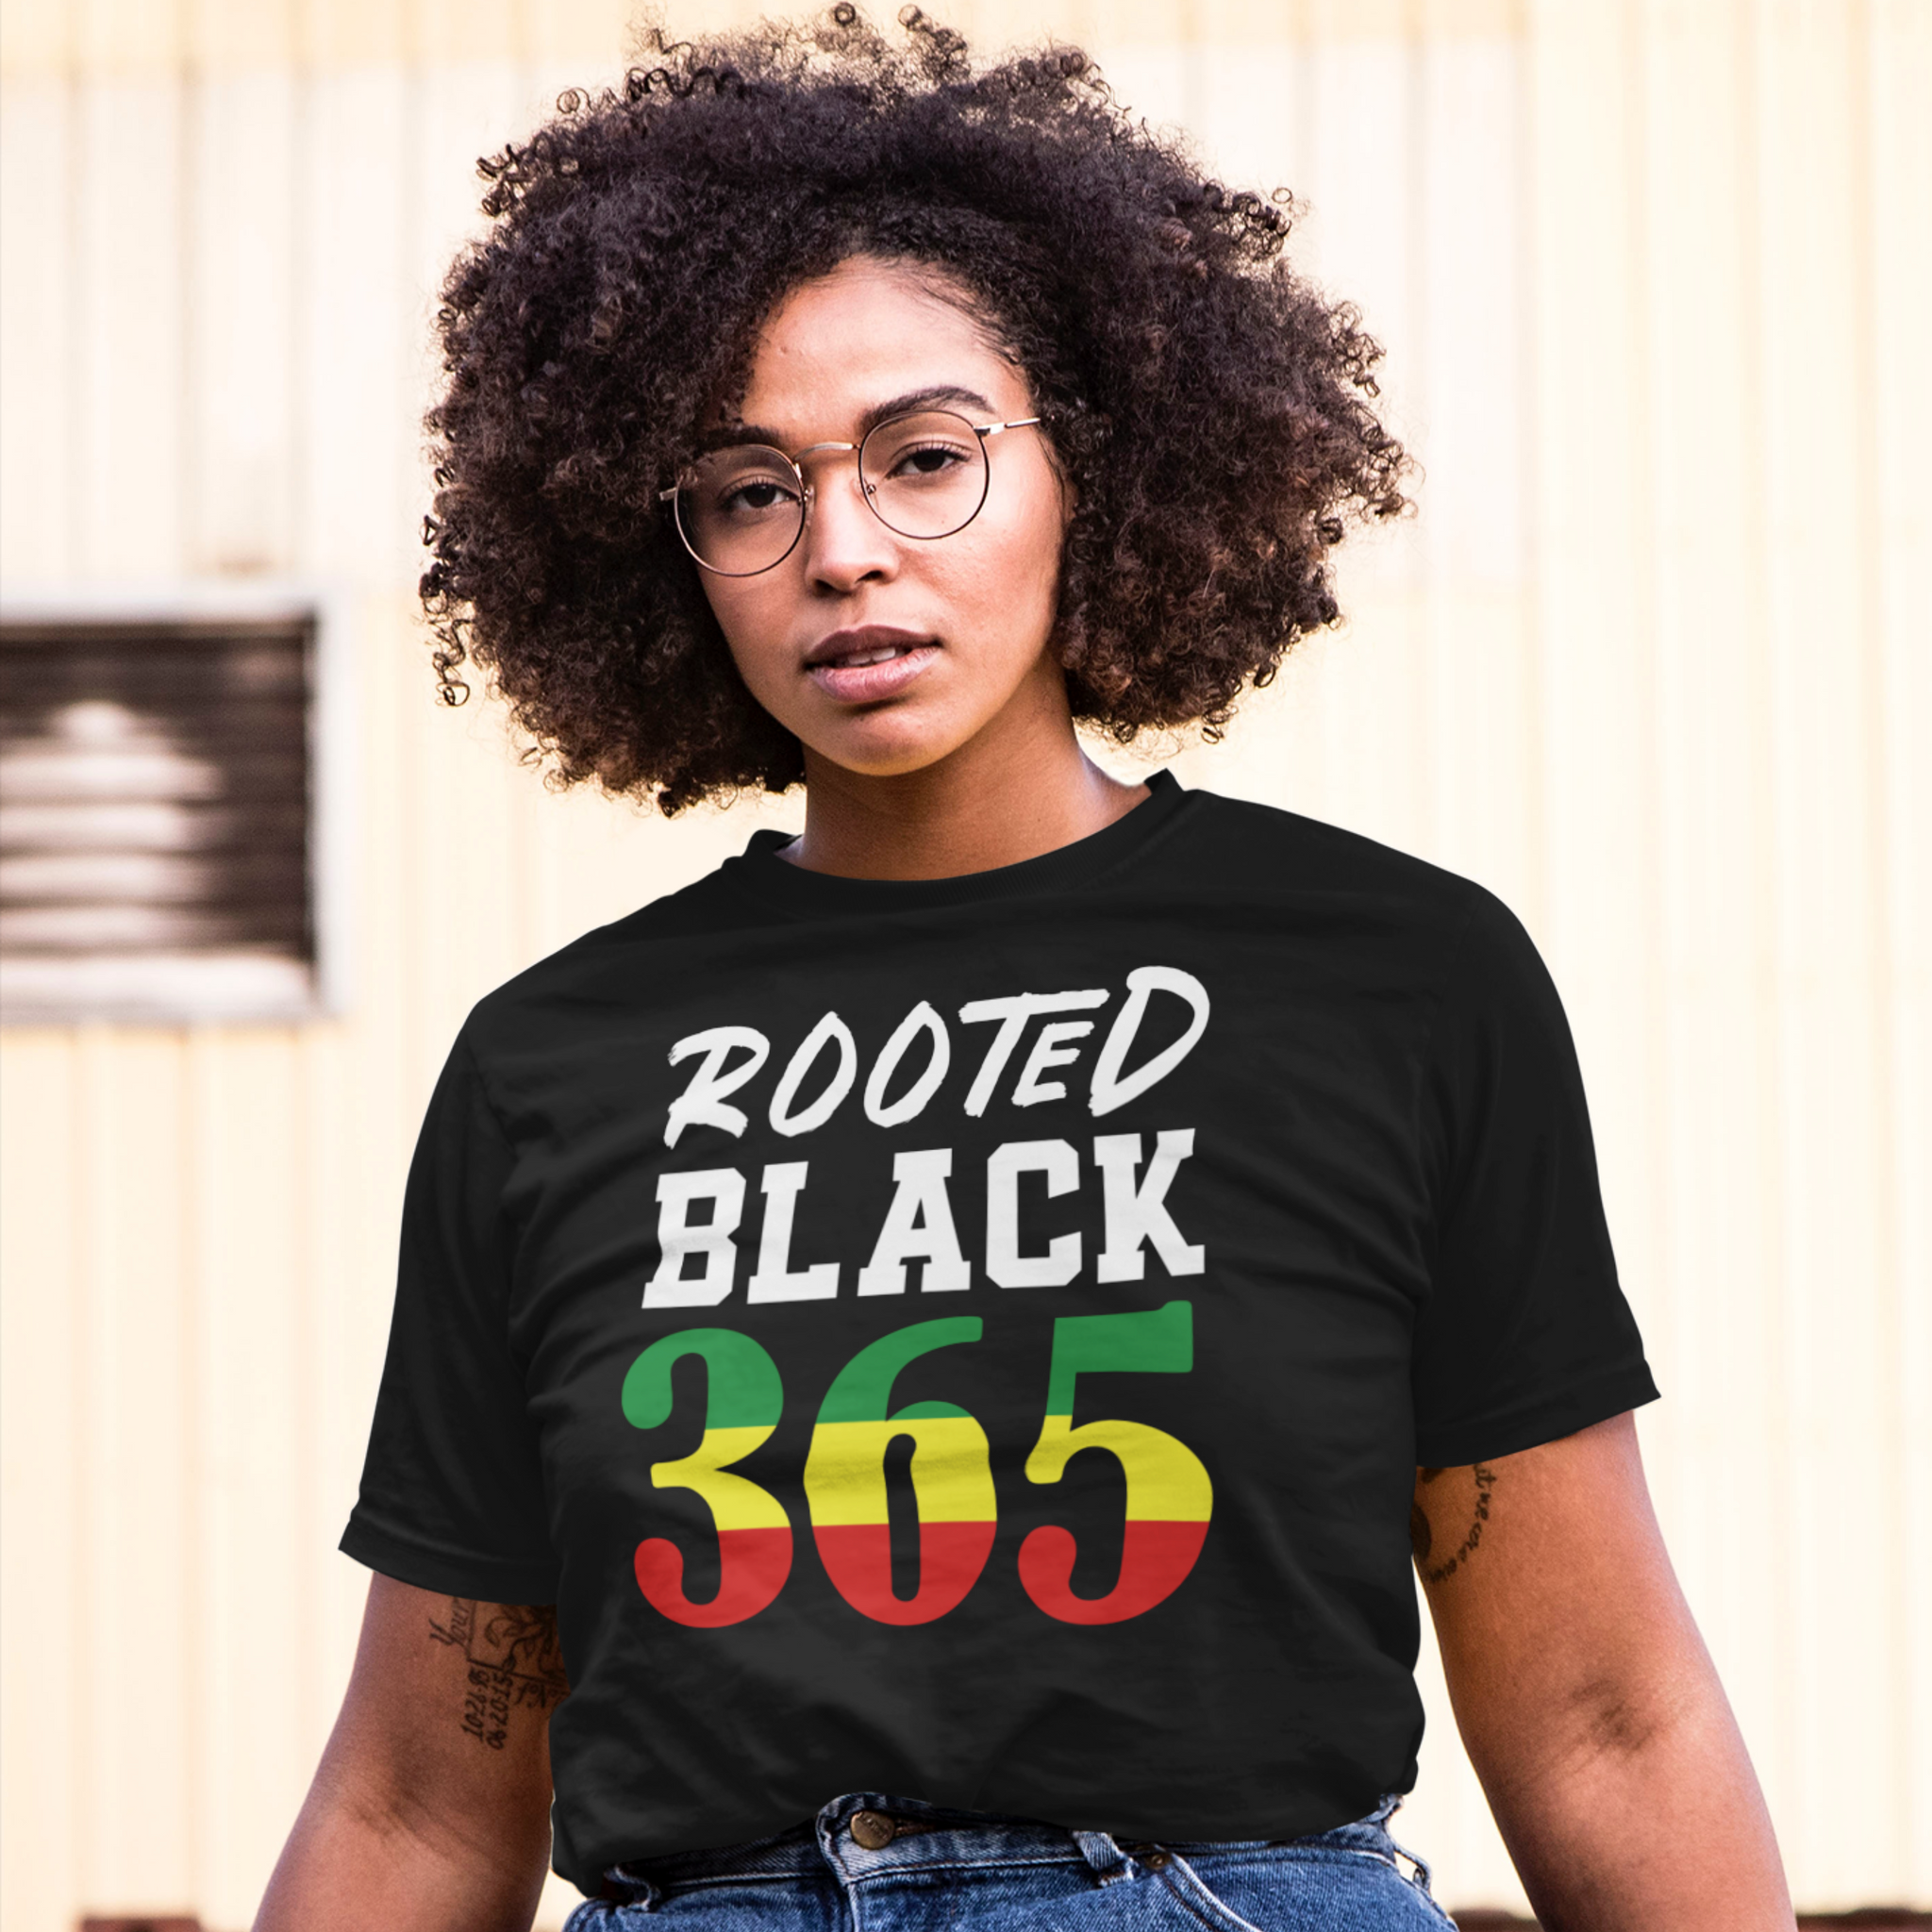 Rooted Black 365 T-shirt